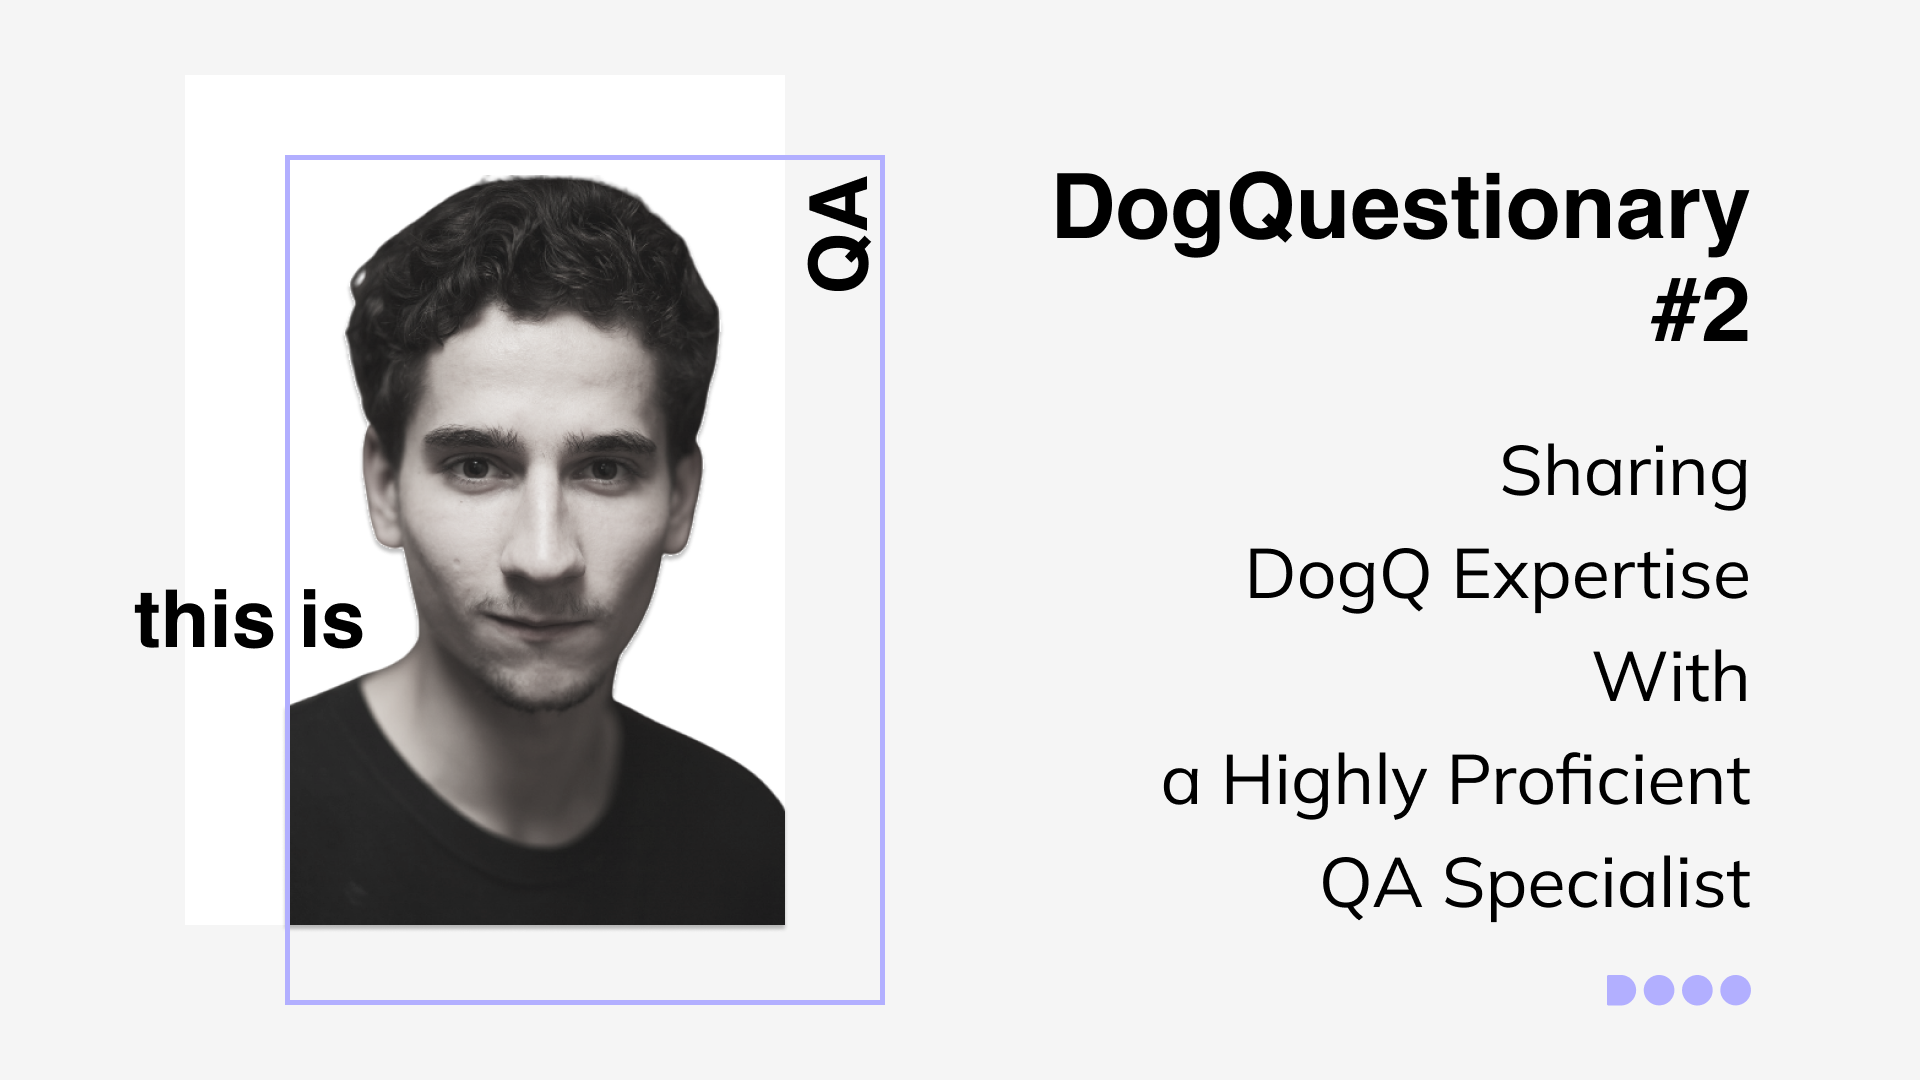 DogQuestionary #2: Sharing DogQ Expertise With a Highly Proficient QA Specialist